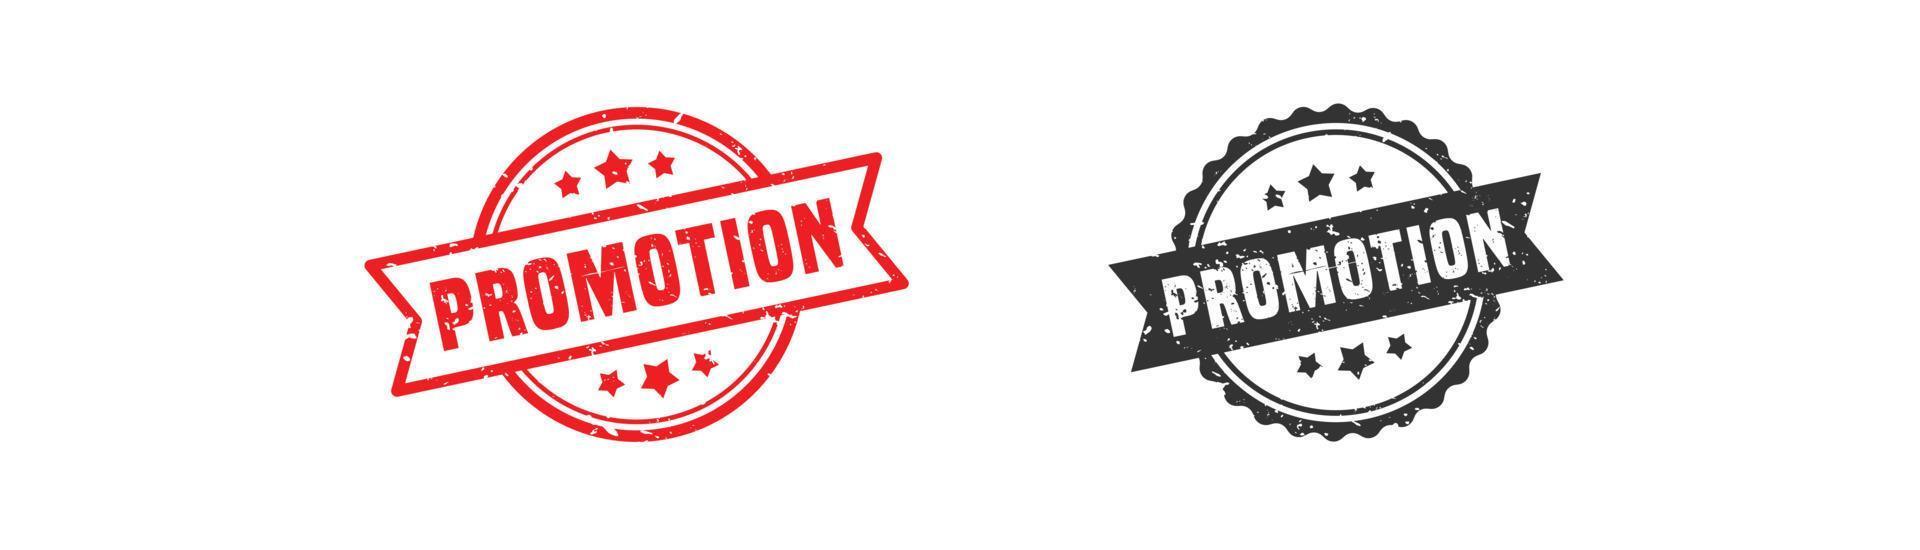 Promotion stamp rubber with grunge style on white background. vector